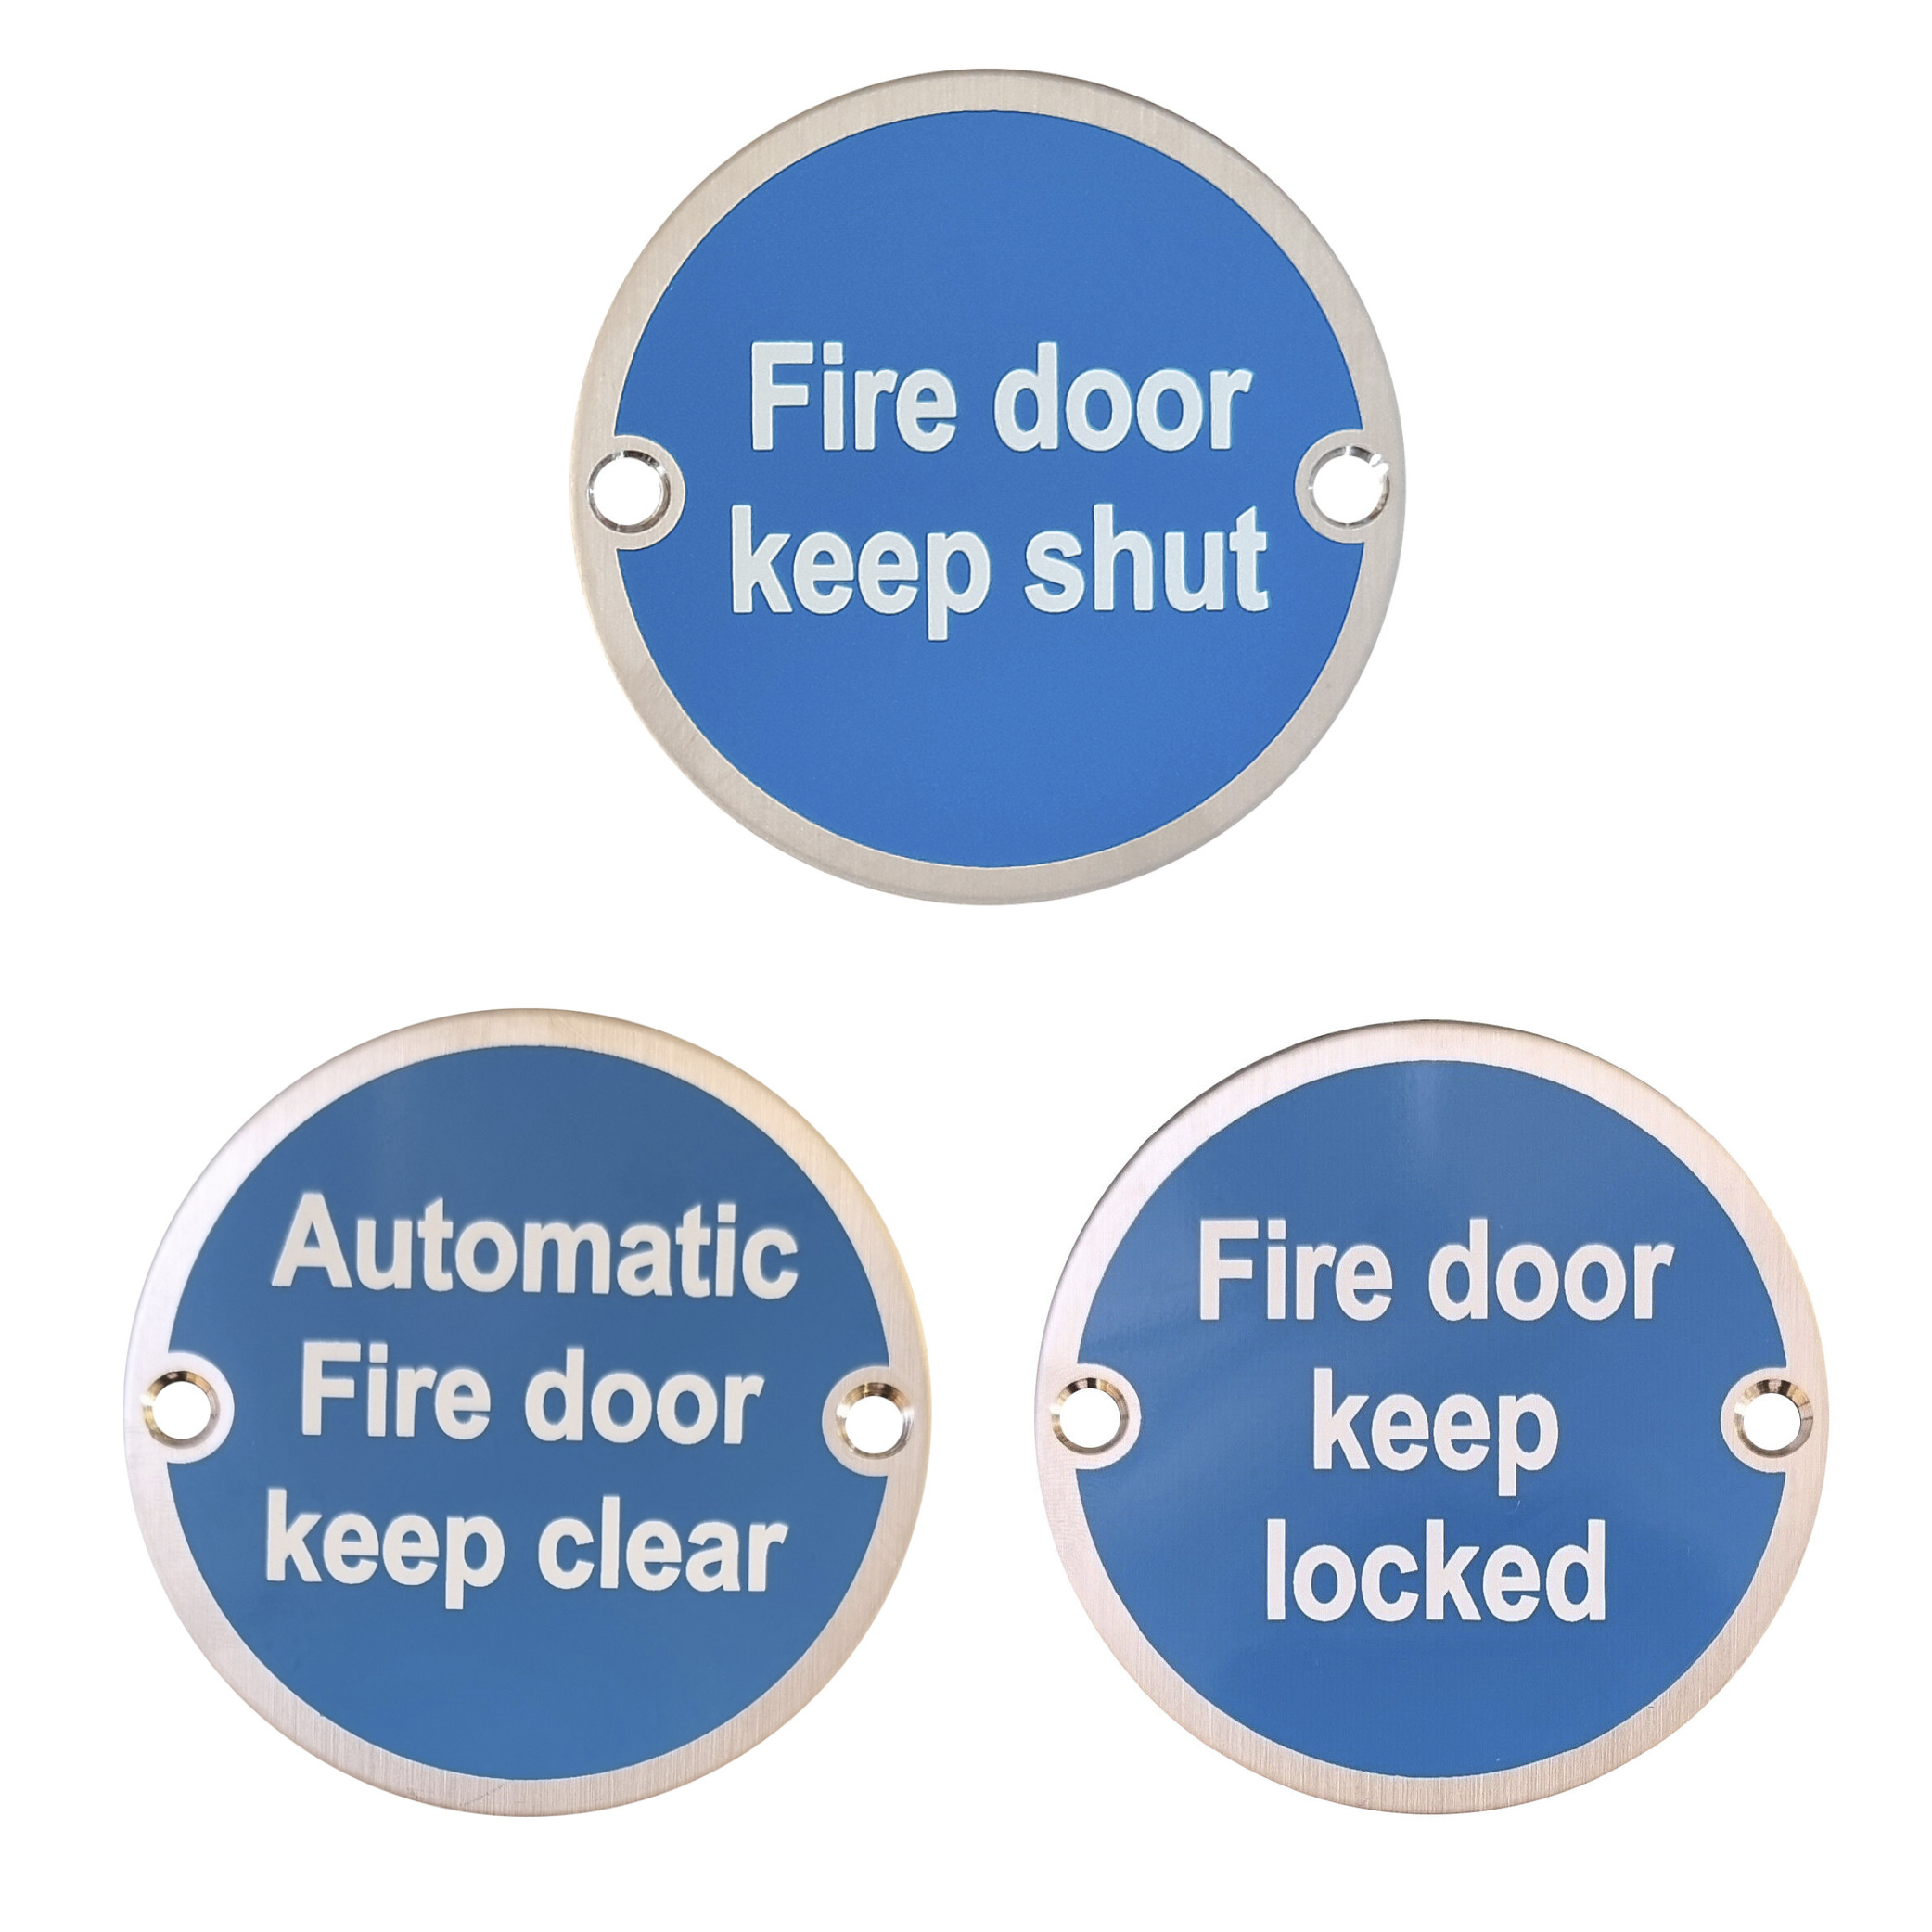 76mm Diameter Fire Door Keep Locked Sign in Satin Stainless Steel Hardware > Door Signs > Safety Signs > 76mm > One Stop For Safety   